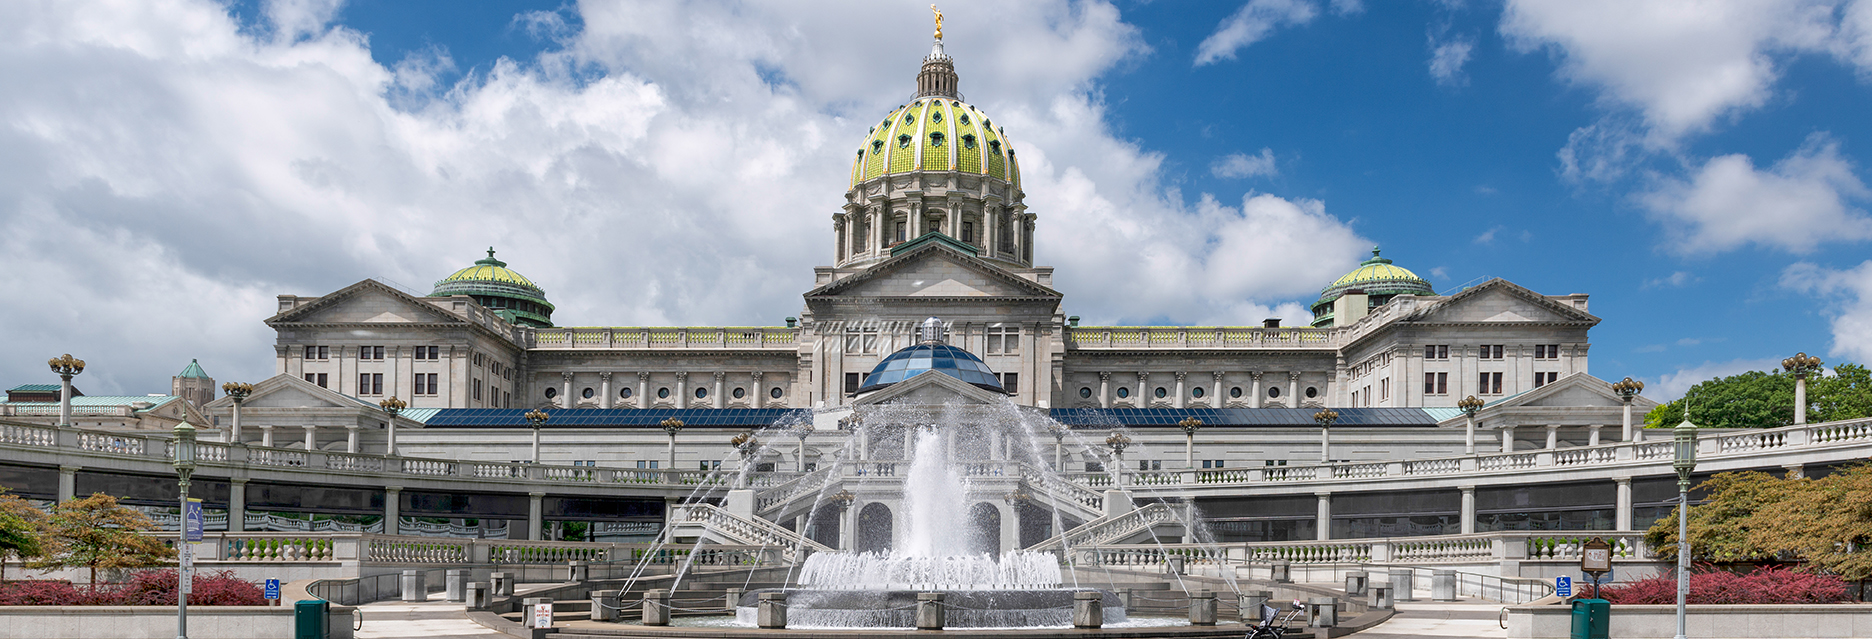 Advocacy Header - Pa. capitol building